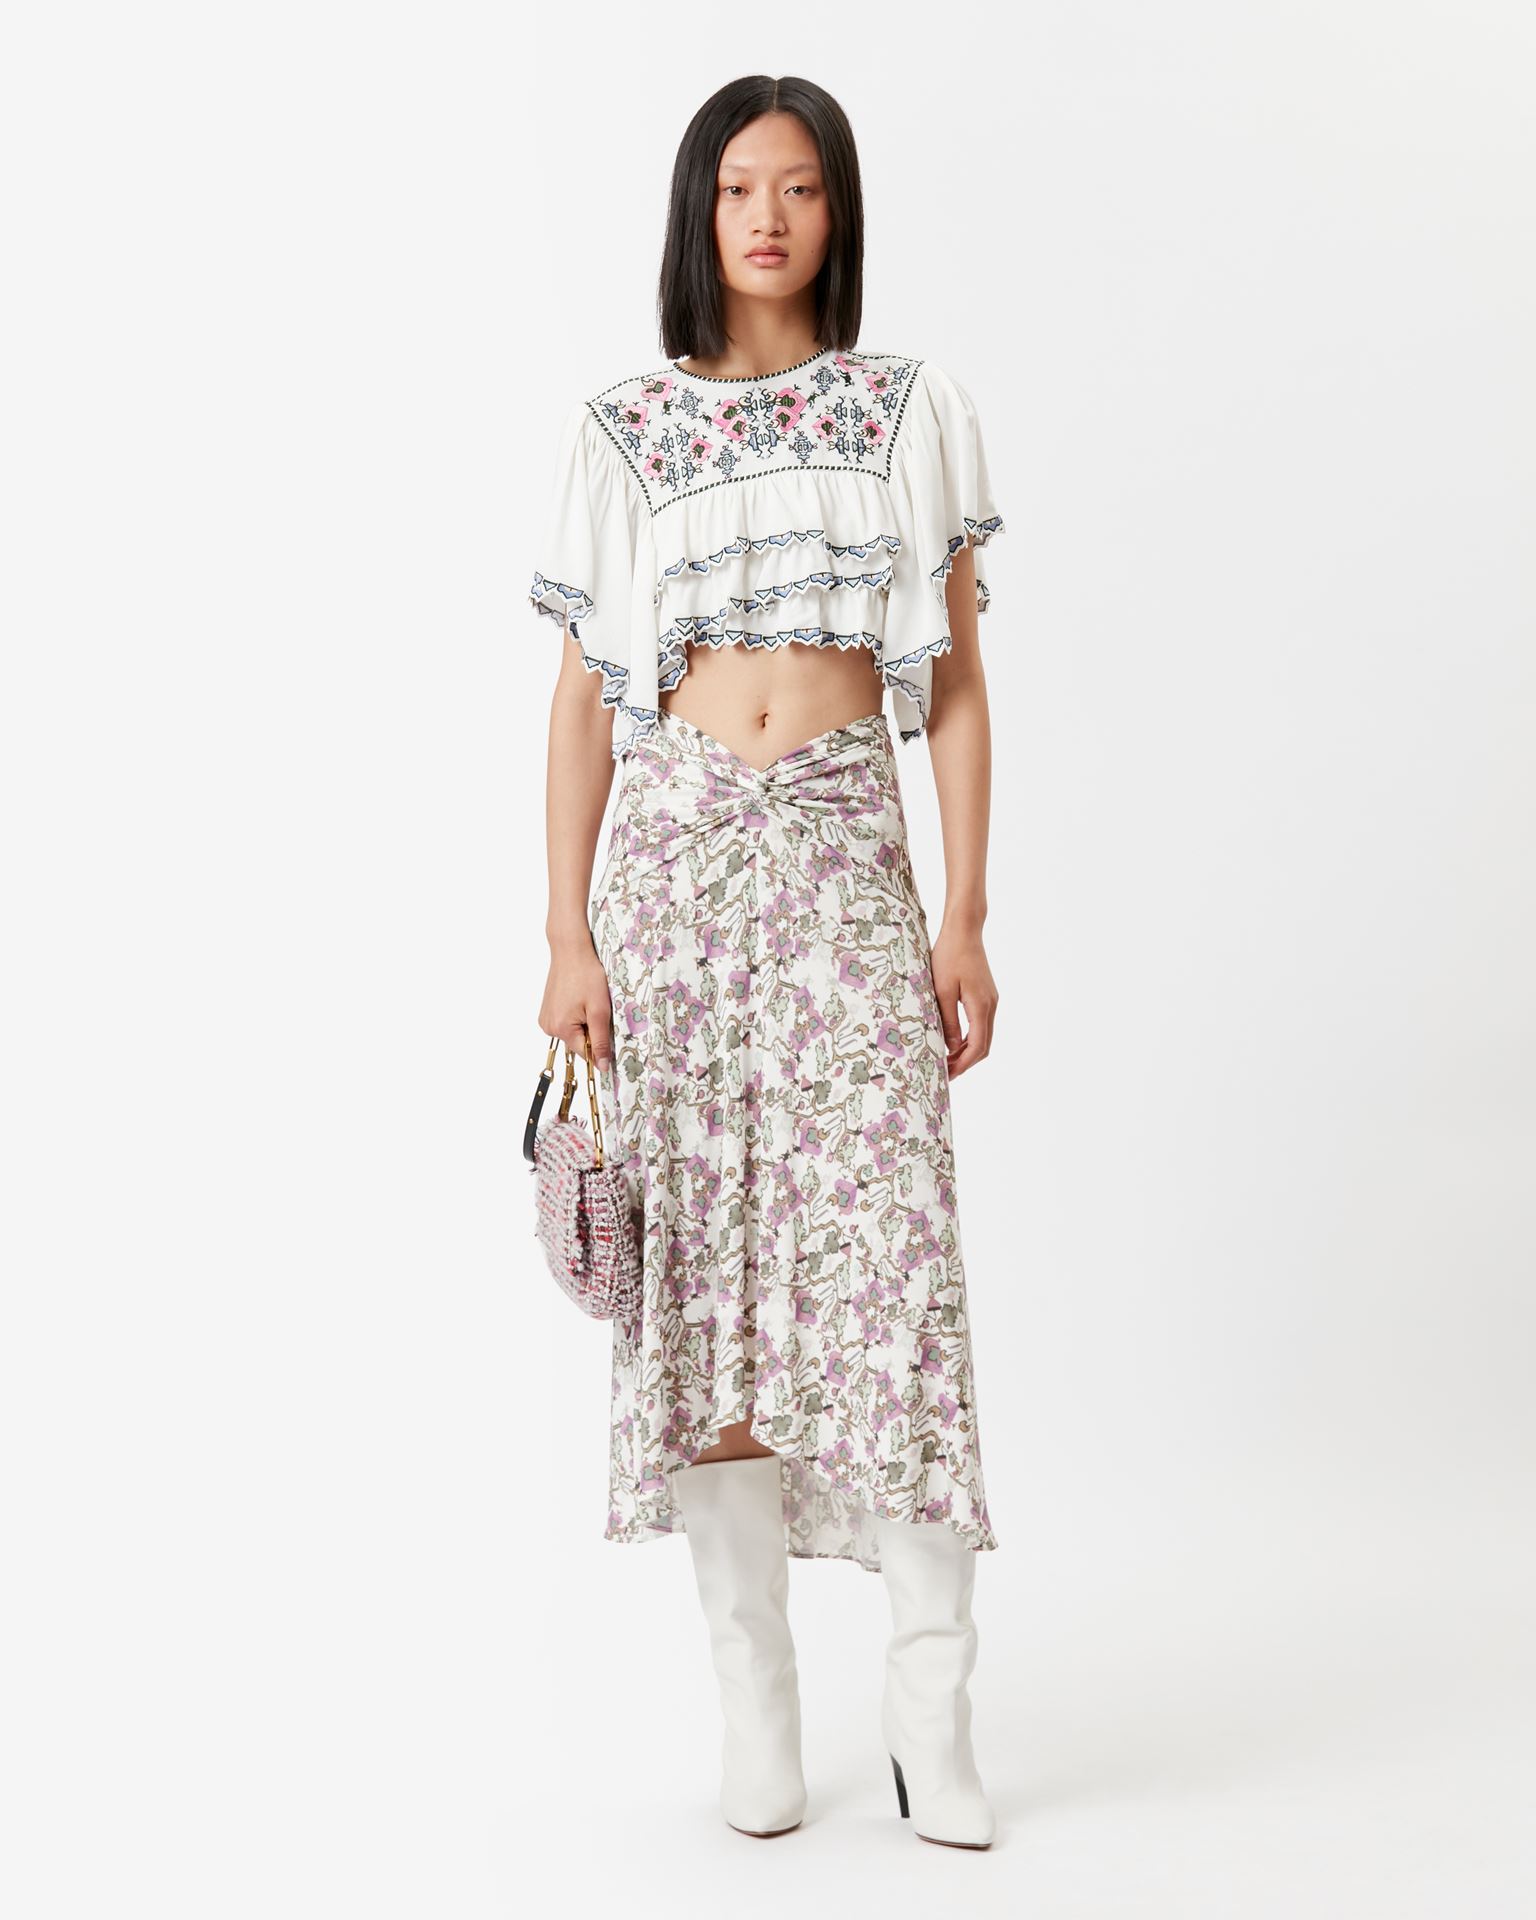 Isabel Marant, Sana Embroidered Crop Top - Women - White